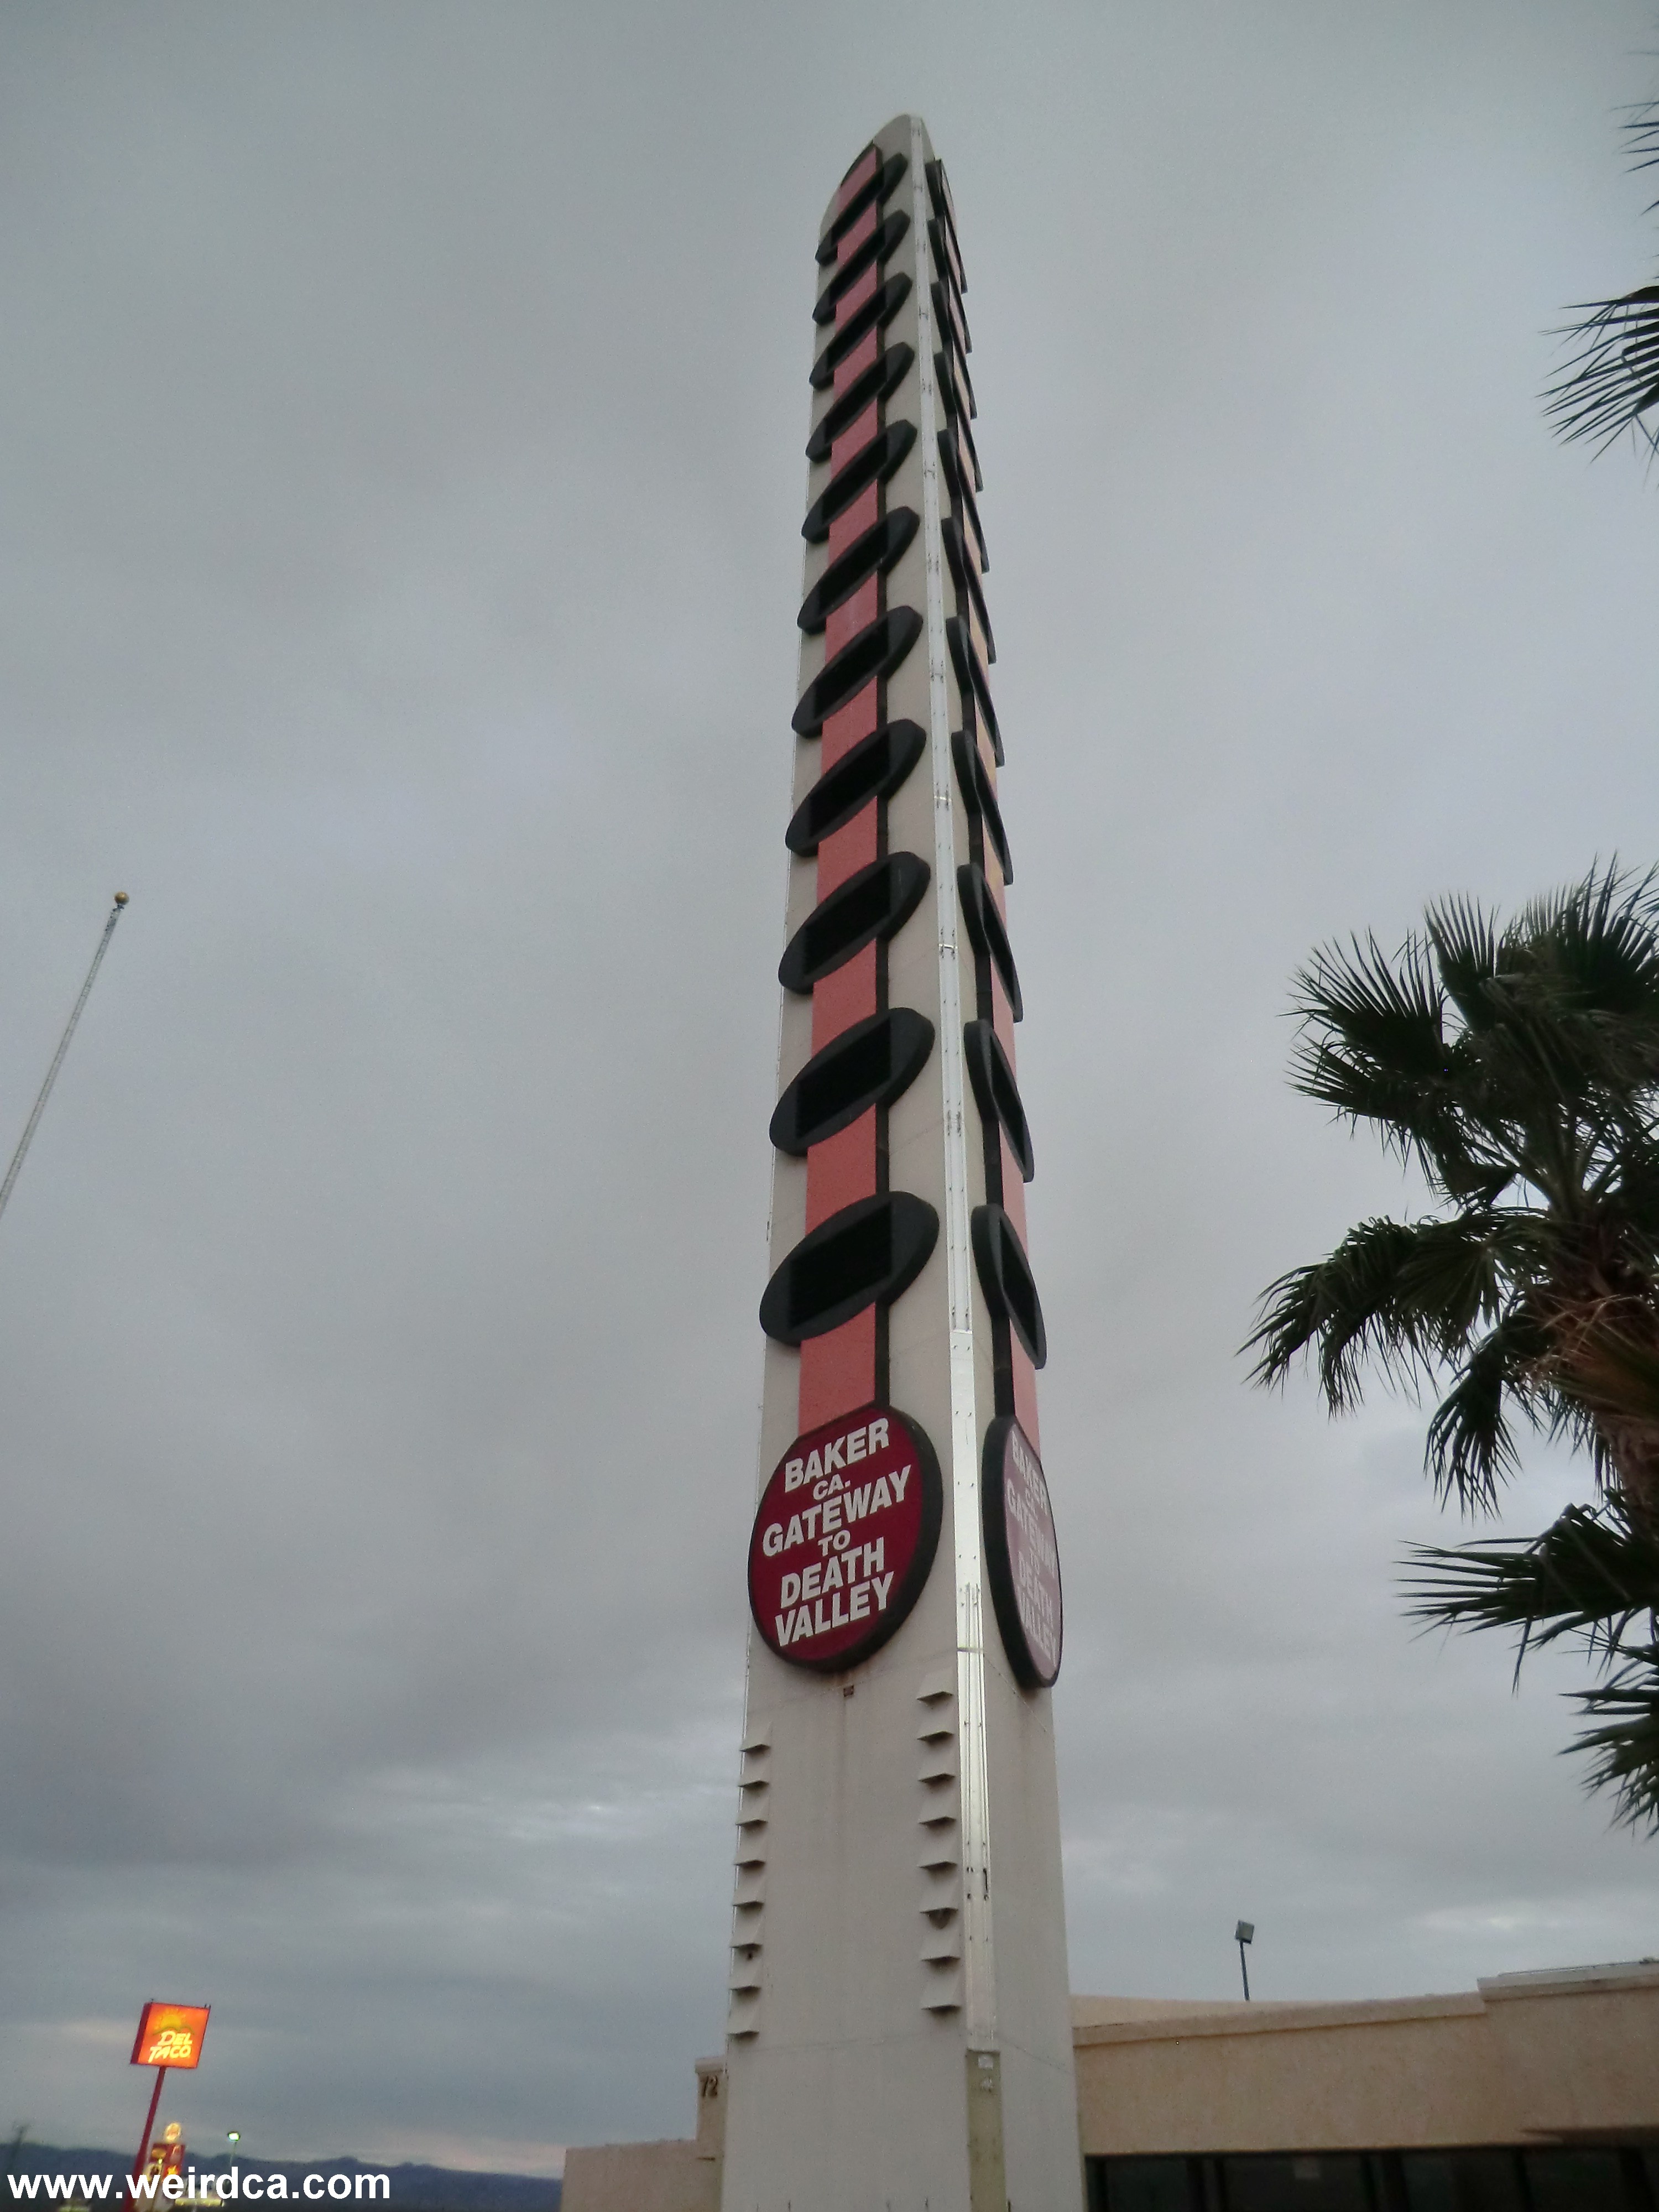 Baker, California: The Tallest Thermometer in the World! 